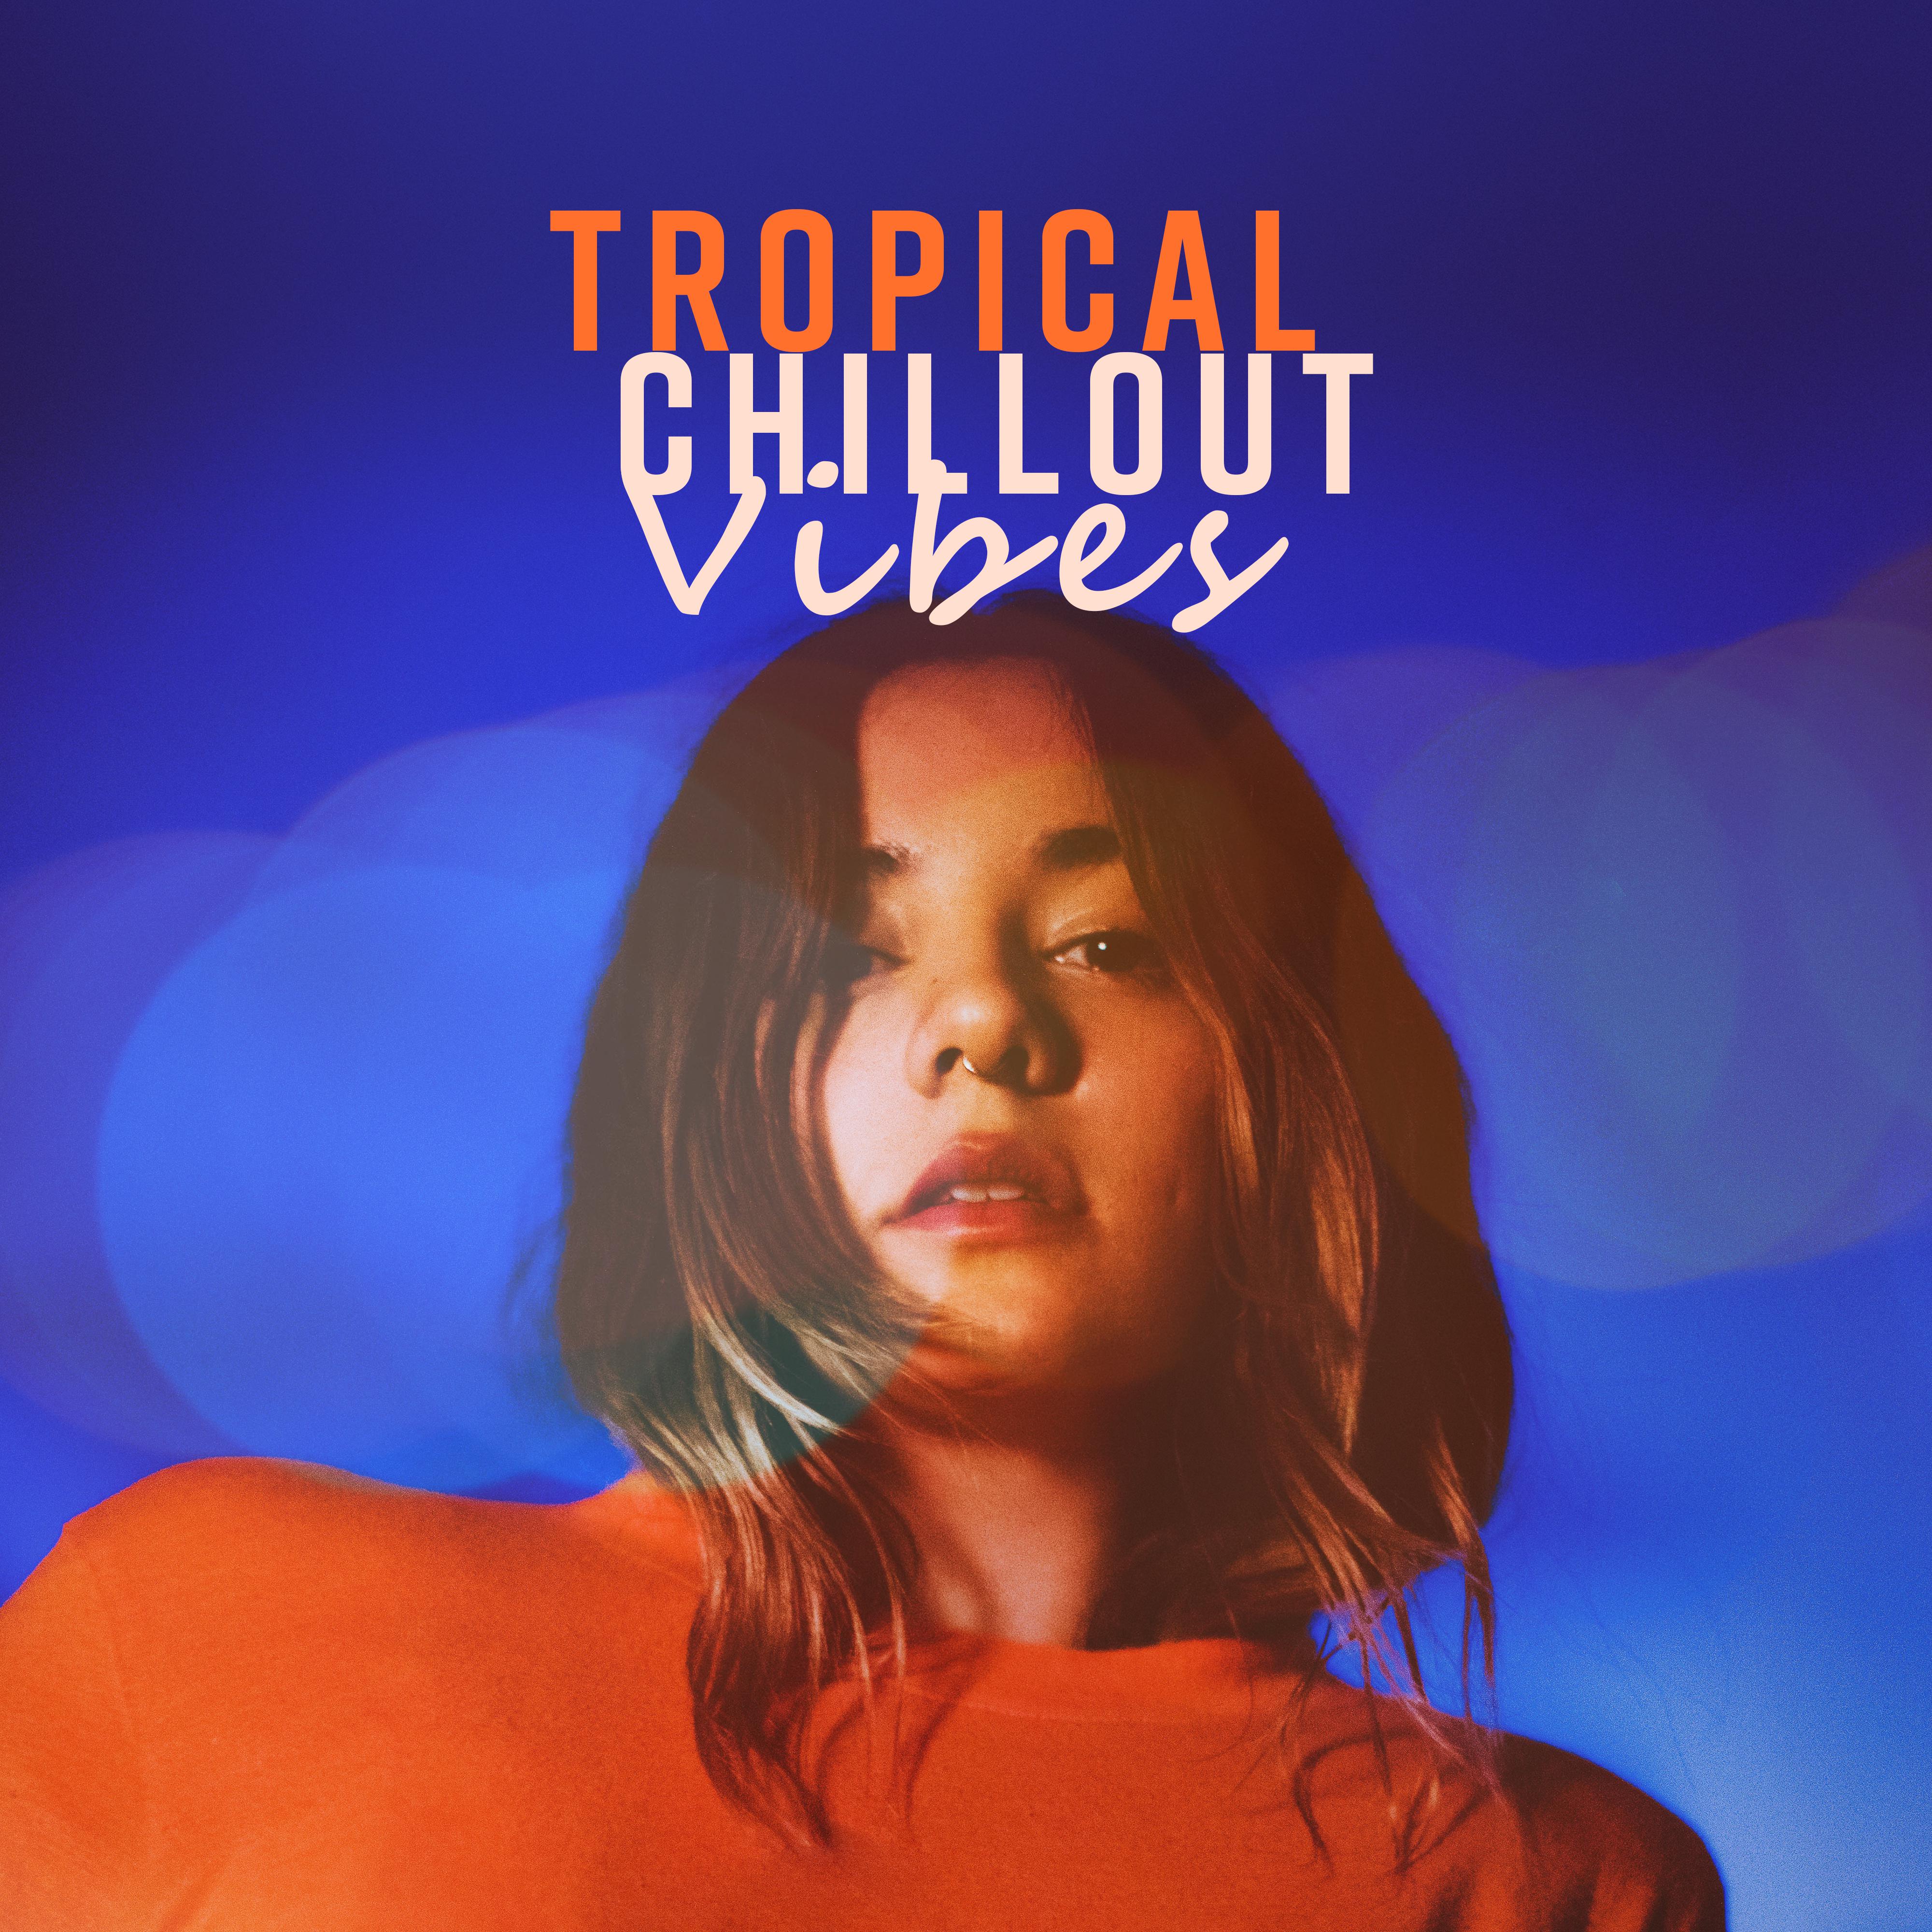 Tropical Chillout Vibes